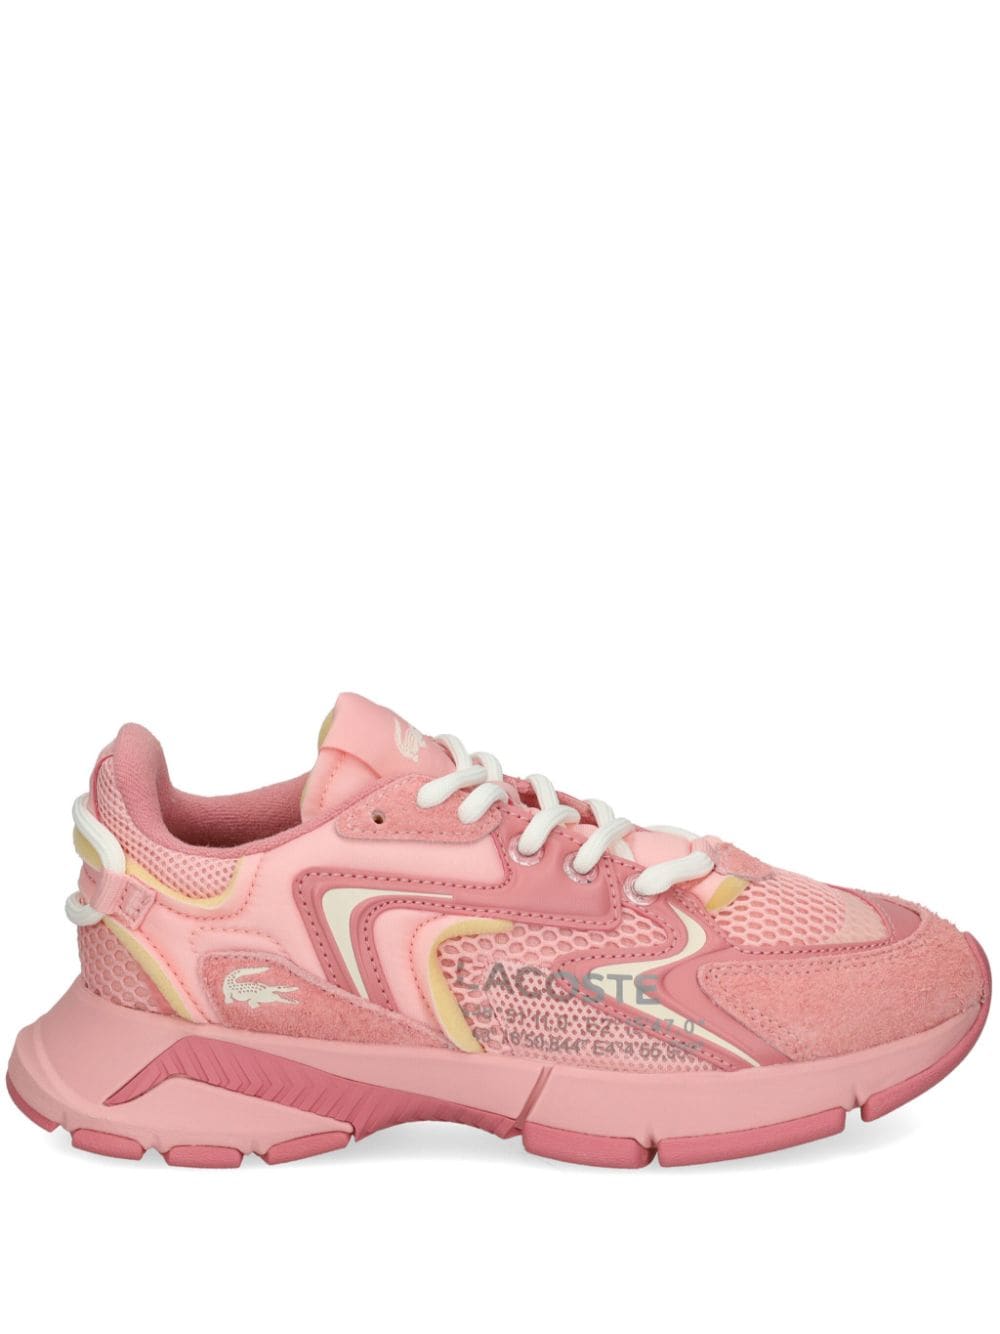 Lacoste L0003 Neo panelled sneakers - Rosa